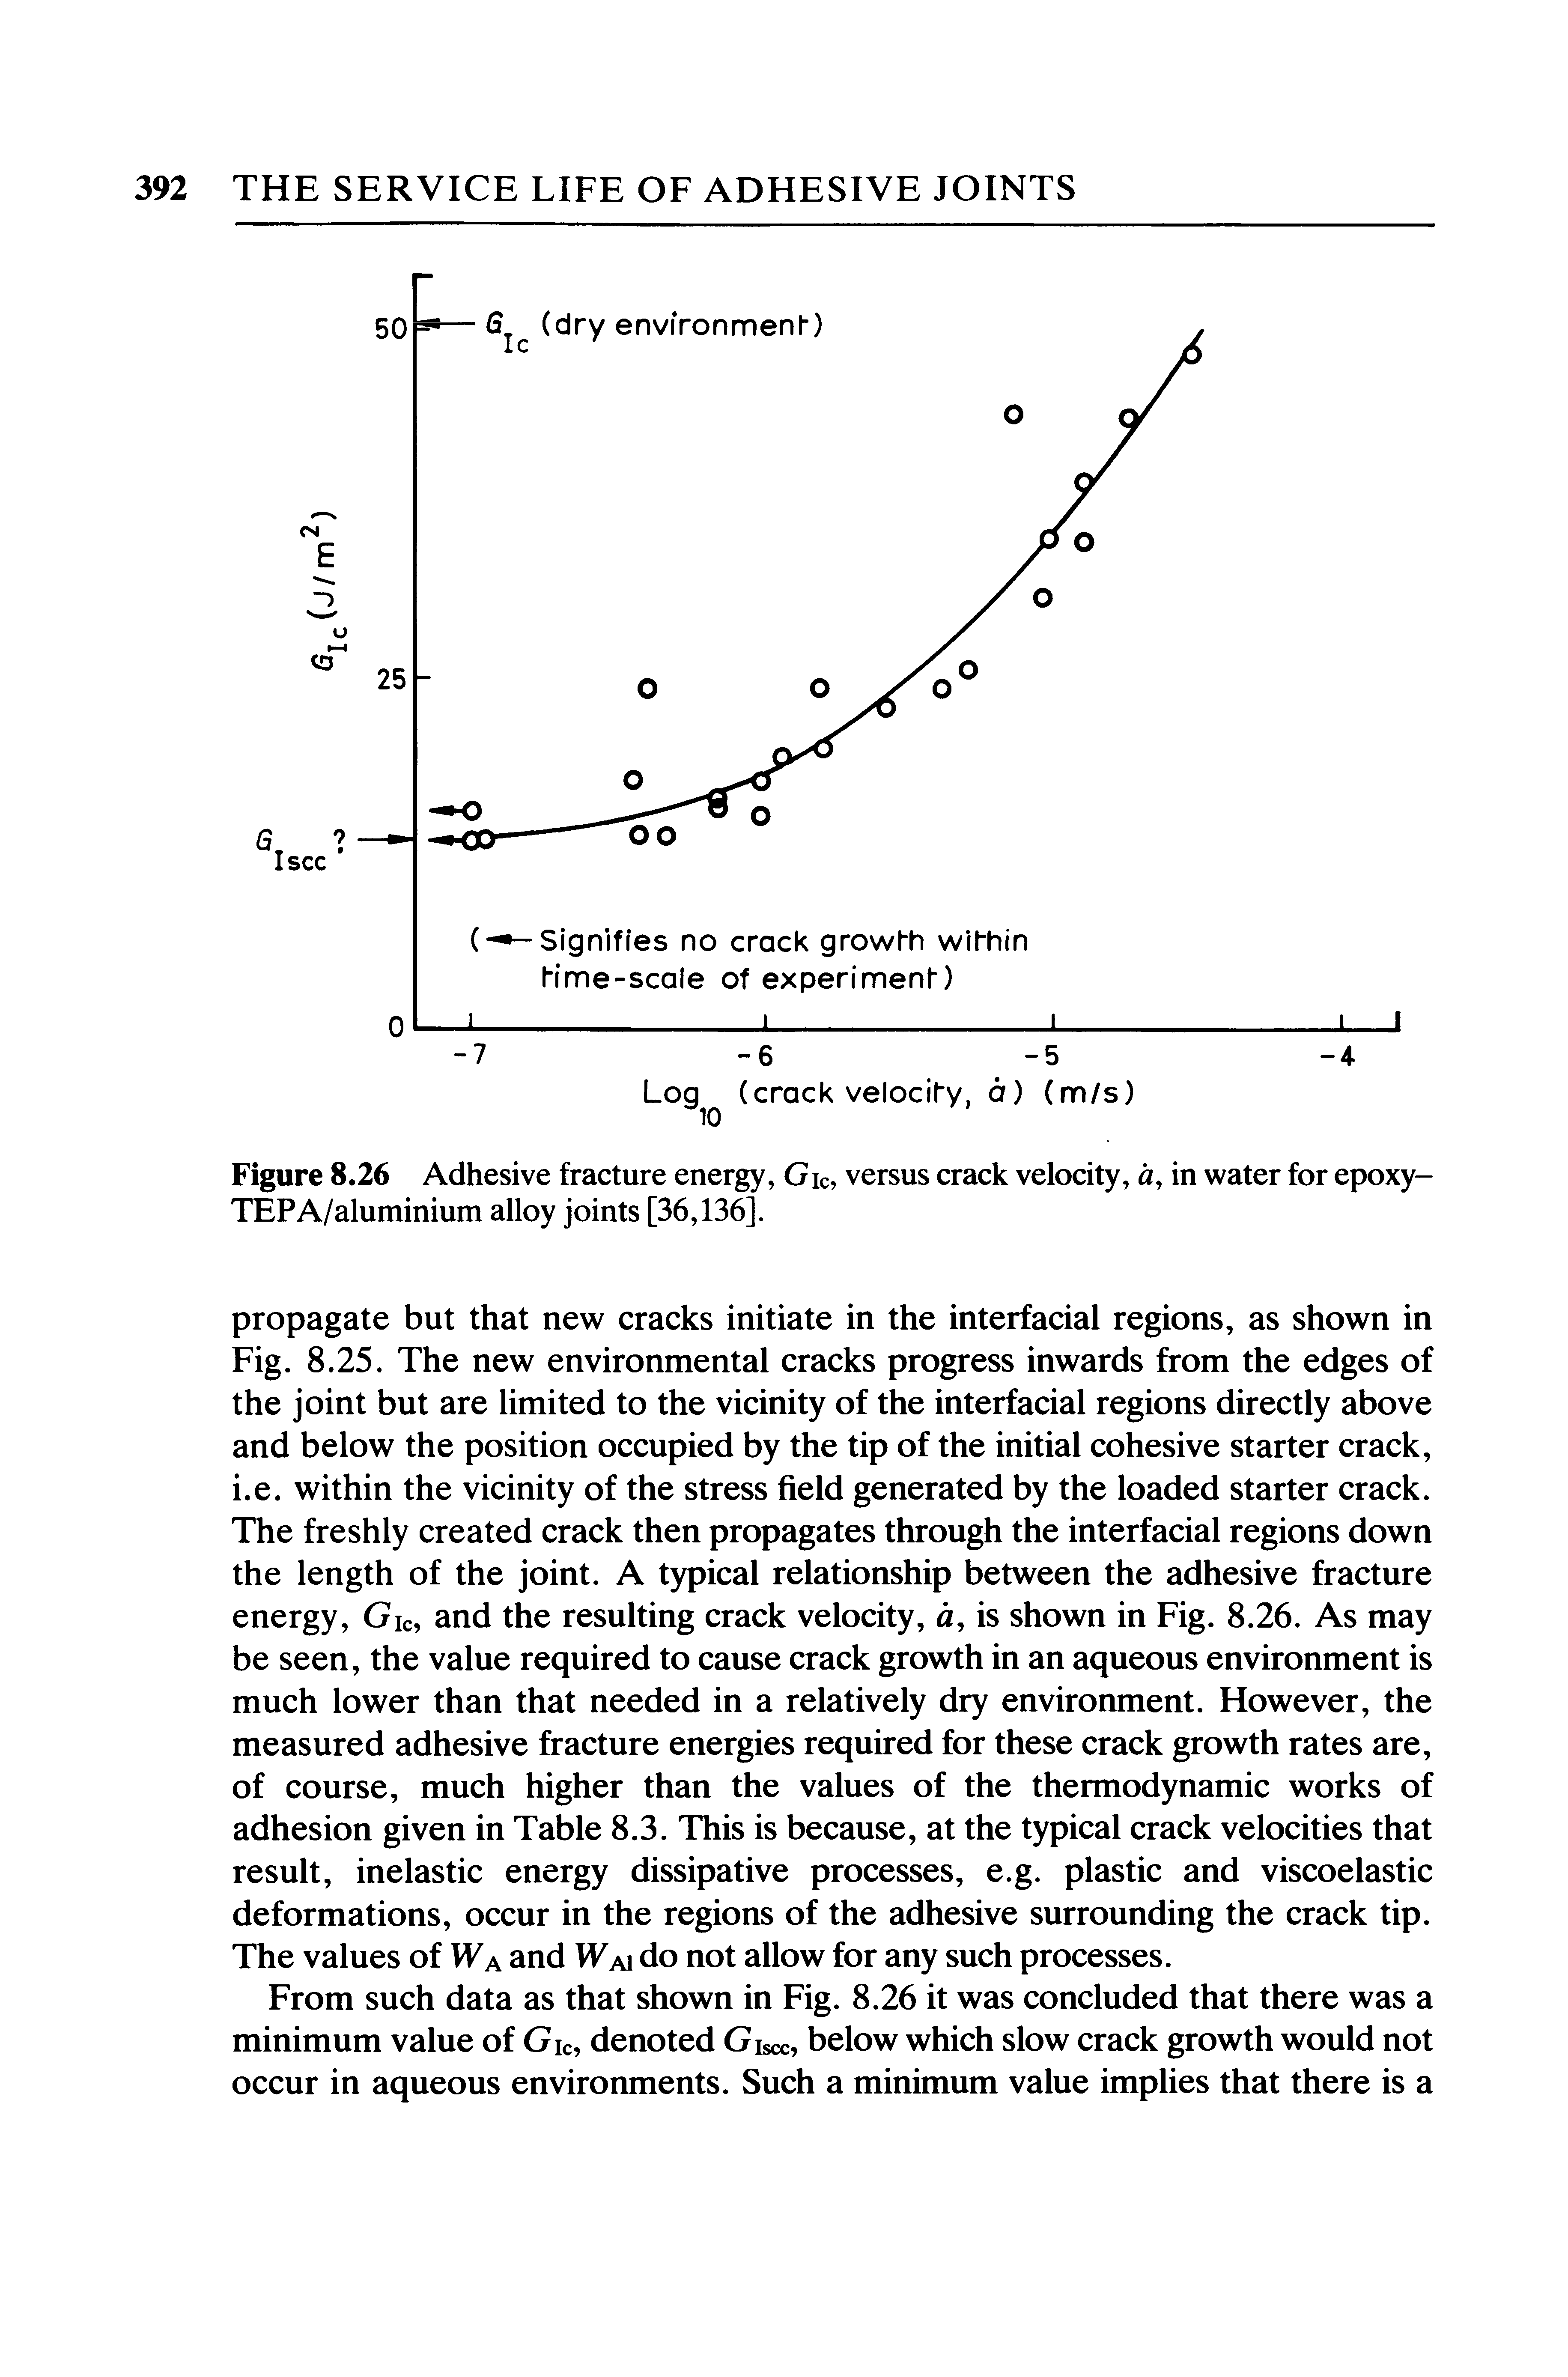 Figure 8.26 Adhesive fracture energy, Gic, versus crack velocity, a, in water for epoxy-TEPA/aluminium alloy joints [36,136].